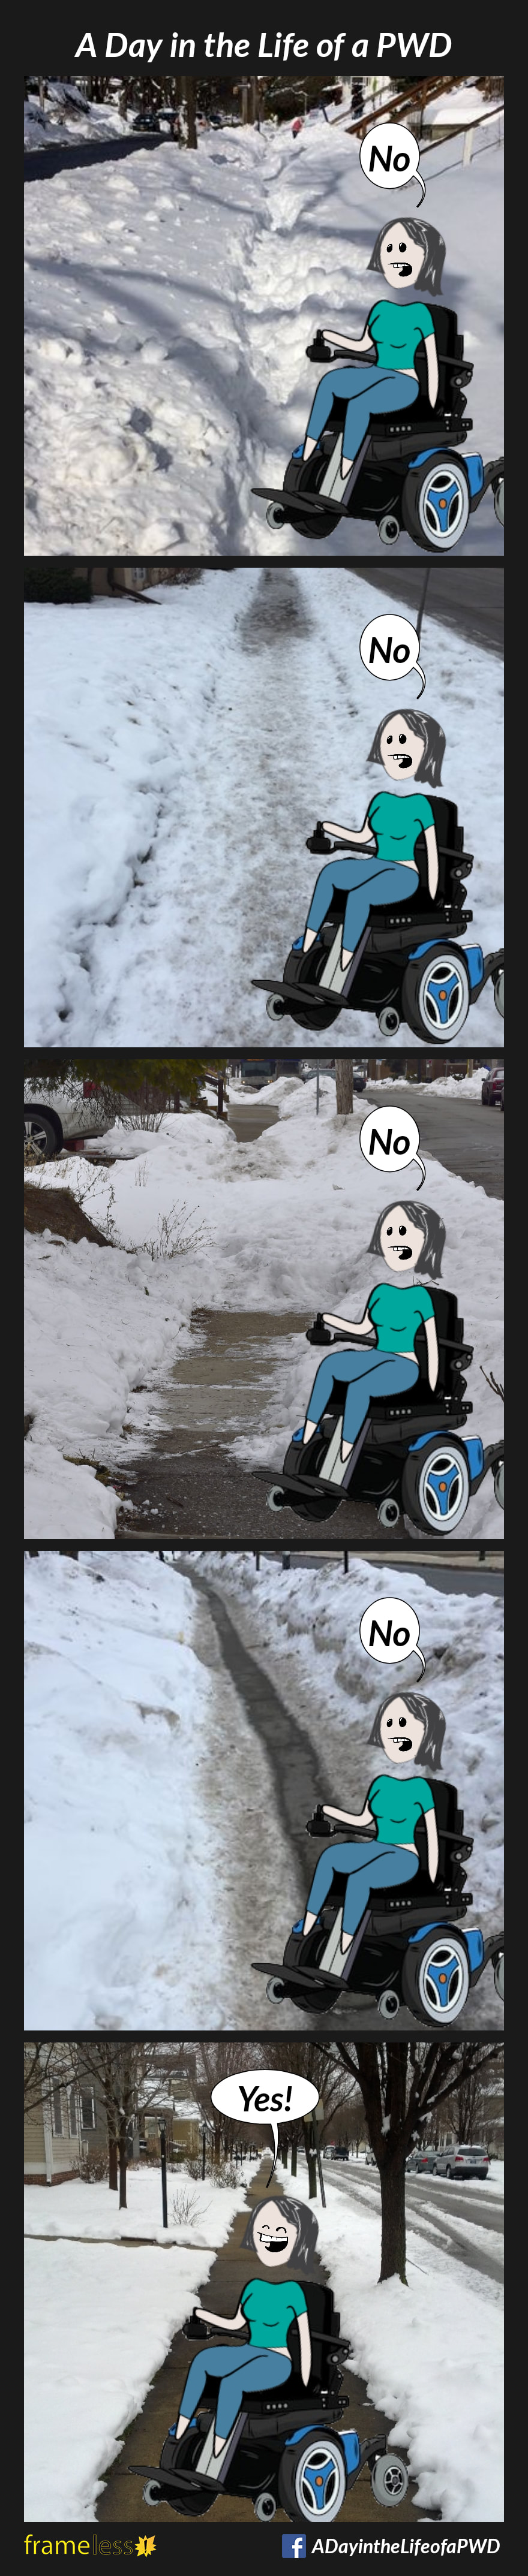 COMIC STRIP 
A Day in the Life of a PWD (Person With a Disability) 

Frame 1:
Photo of an unshoveled sidewalk covered in snow.
A woman in a power wheelchair says 